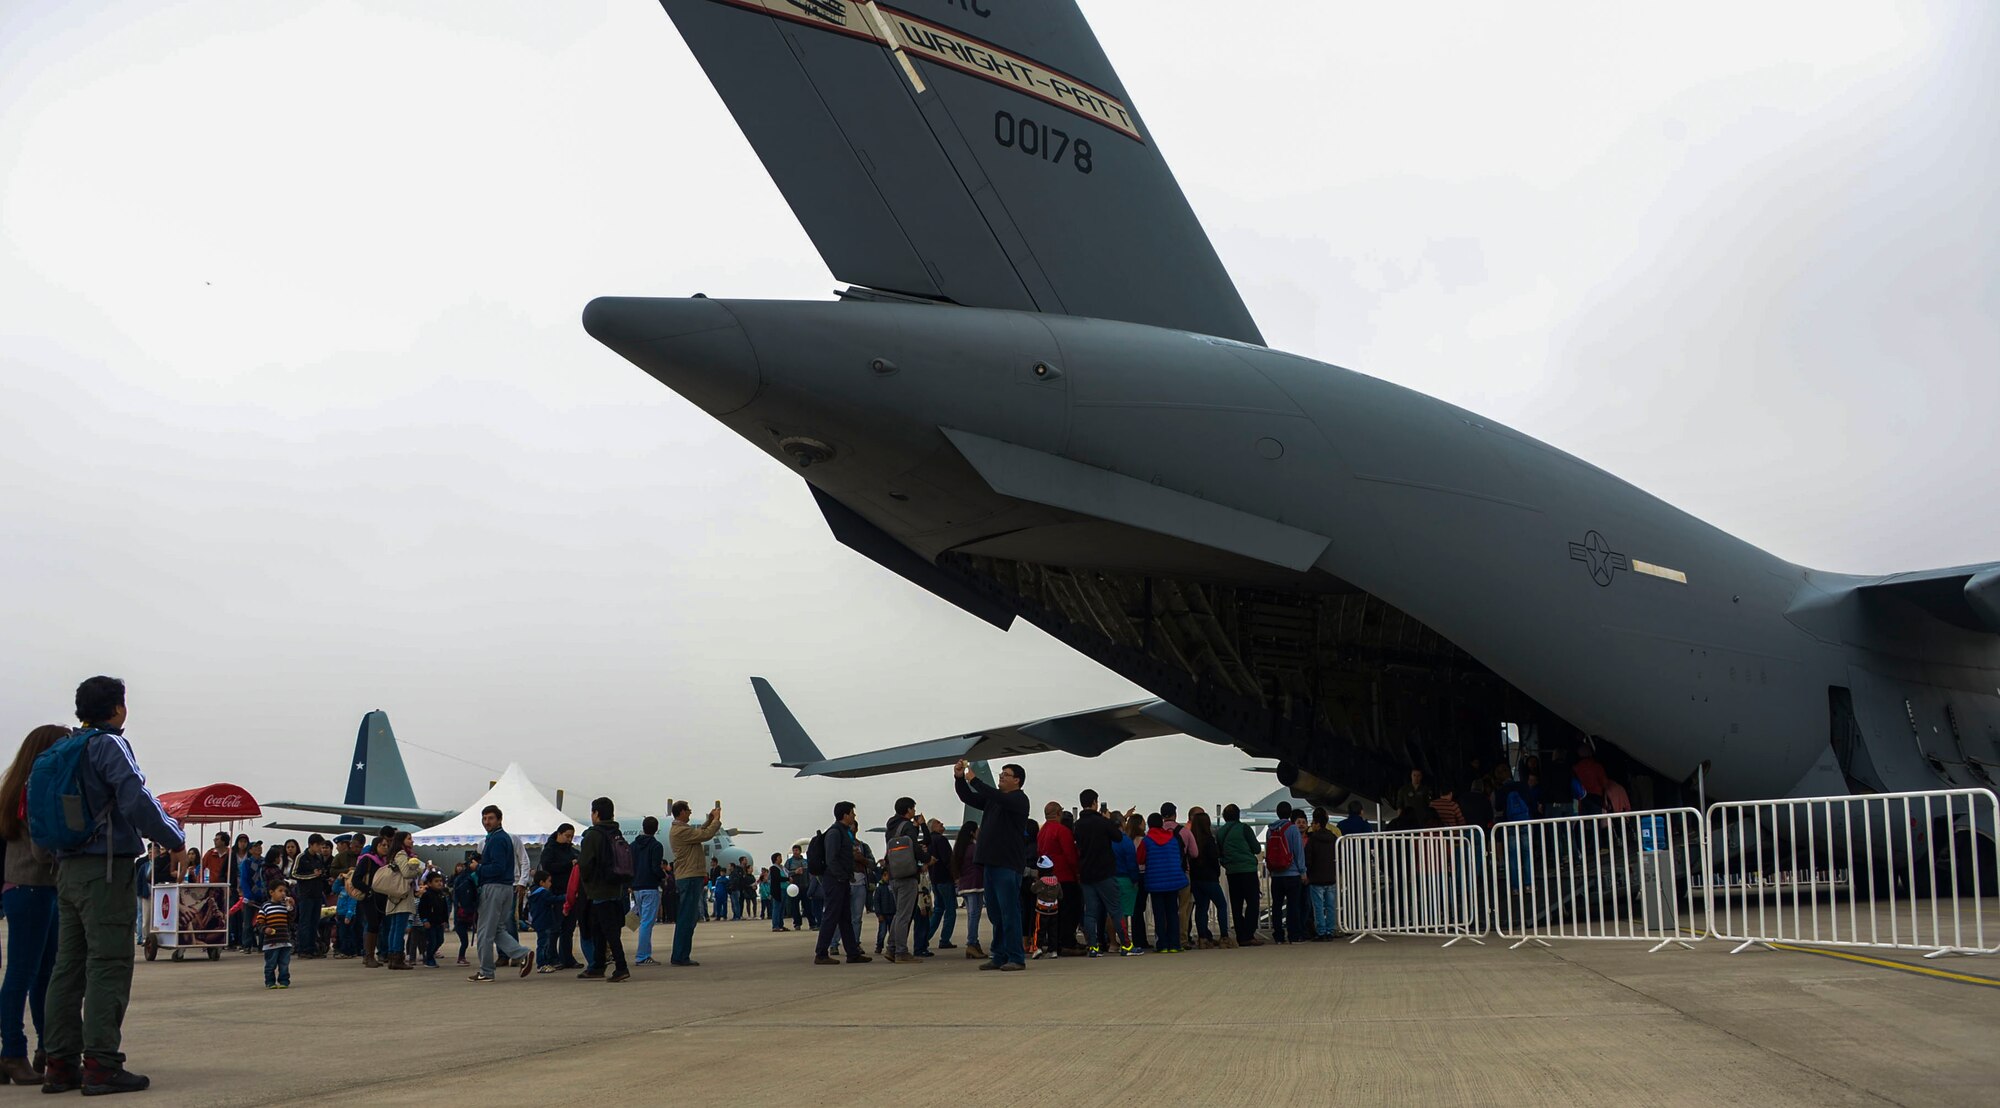 Hundreds of people gather to tour the C-17 Globemaster III, from Wright-Patterson AFB, Ohio, at the 2016 International Air and Space Fair (FIDAE) in Santiago, Chile April 2, 2016.  Airmen from around the U.S. are scheduled to participate in a variety of activities during the week-long air show that includes aerial demonstrations, interaction with the local community, and subject matter expert exchanges with the Chilean air force. (U.S. Air Force photo by Tech. Sgt. Heather Redman/Released)